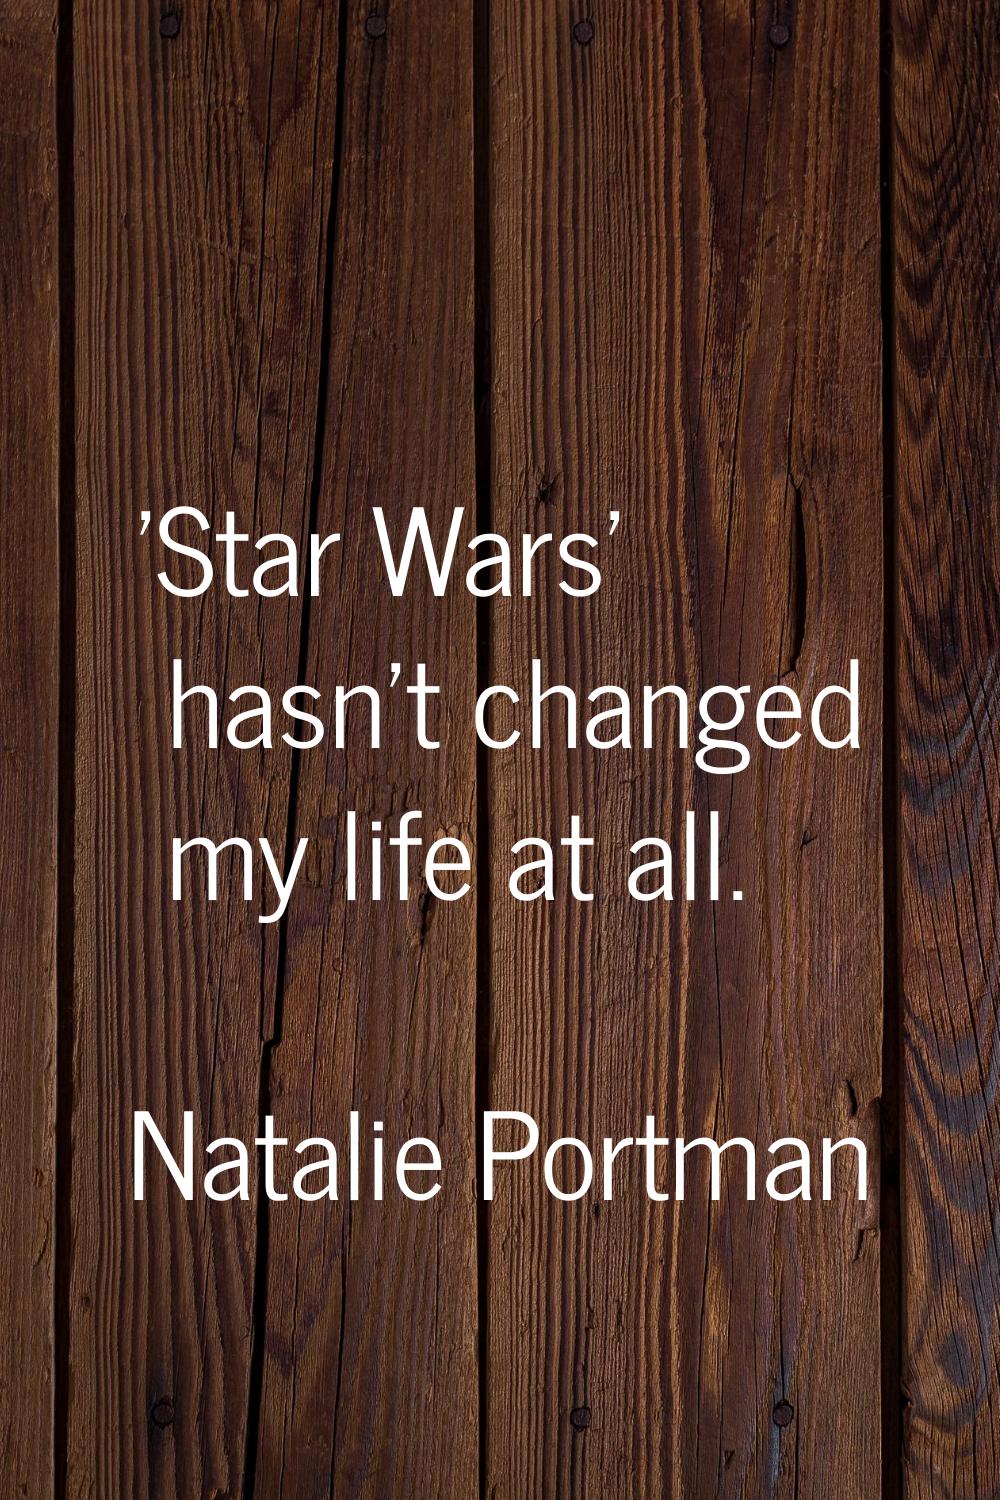 'Star Wars' hasn't changed my life at all.